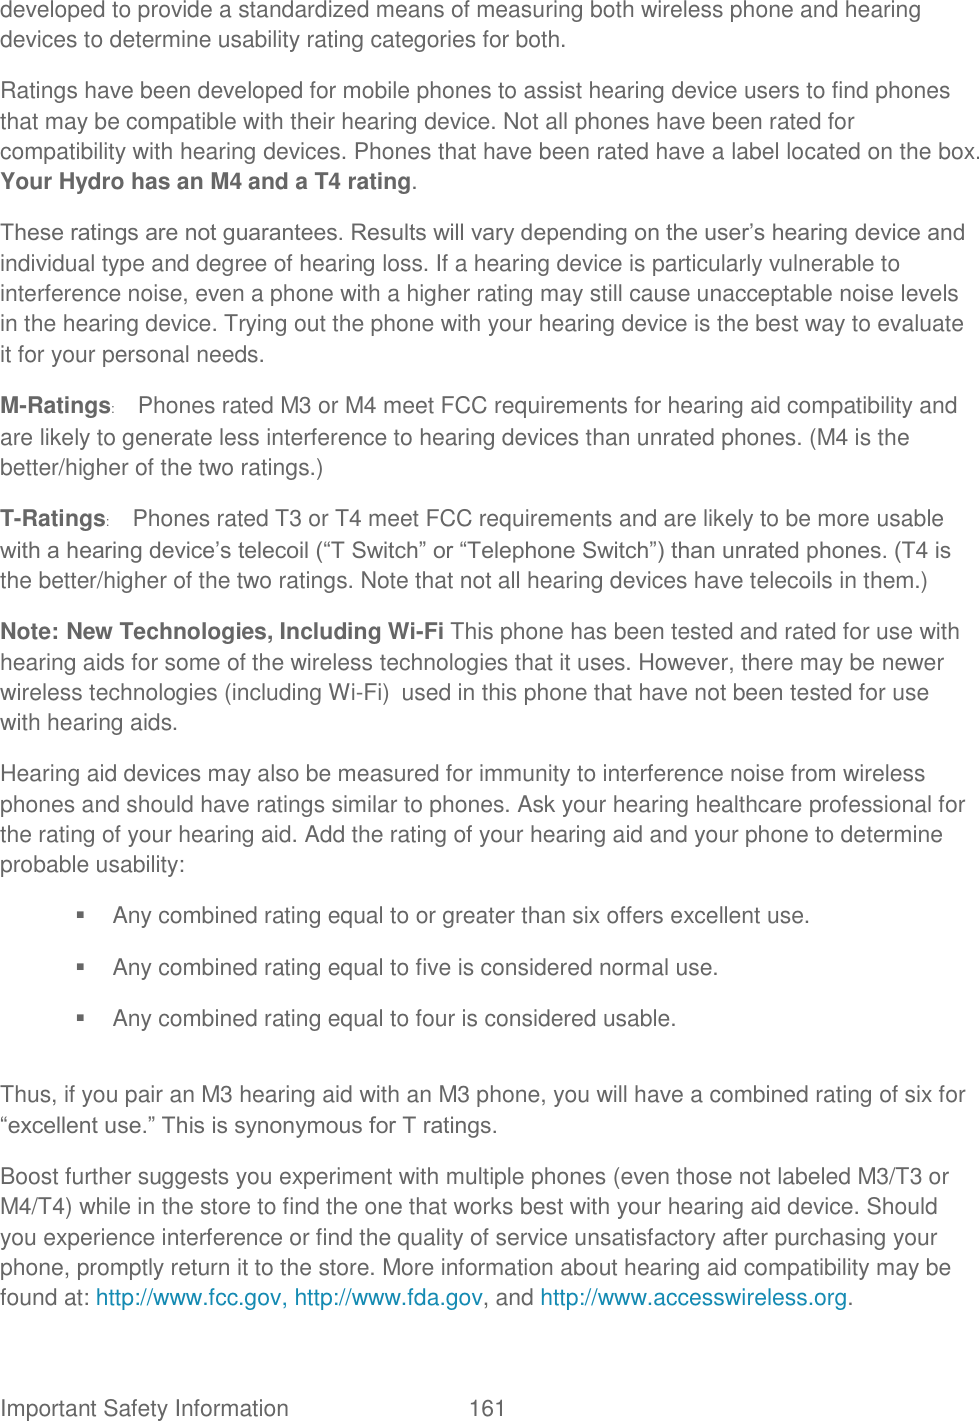  Important Safety Information  161   developed to provide a standardized means of measuring both wireless phone and hearing devices to determine usability rating categories for both.   Ratings have been developed for mobile phones to assist hearing device users to find phones that may be compatible with their hearing device. Not all phones have been rated for compatibility with hearing devices. Phones that have been rated have a label located on the box. Your Hydro has an M4 and a T4 rating.   These ratings are not guarantees. Results will vary depending on the user‟s hearing device and individual type and degree of hearing loss. If a hearing device is particularly vulnerable to interference noise, even a phone with a higher rating may still cause unacceptable noise levels in the hearing device. Trying out the phone with your hearing device is the best way to evaluate it for your personal needs.   M-Ratings:  Phones rated M3 or M4 meet FCC requirements for hearing aid compatibility and are likely to generate less interference to hearing devices than unrated phones. (M4 is the better/higher of the two ratings.)   T-Ratings:  Phones rated T3 or T4 meet FCC requirements and are likely to be more usable with a hearing device‟s telecoil (“T Switch” or “Telephone Switch”) than unrated phones. (T4 is the better/higher of the two ratings. Note that not all hearing devices have telecoils in them.)   Note: New Technologies, Including Wi-Fi This phone has been tested and rated for use with hearing aids for some of the wireless technologies that it uses. However, there may be newer wireless technologies (including Wi-Fi) used in this phone that have not been tested for use with hearing aids. Hearing aid devices may also be measured for immunity to interference noise from wireless phones and should have ratings similar to phones. Ask your hearing healthcare professional for the rating of your hearing aid. Add the rating of your hearing aid and your phone to determine probable usability:     Any combined rating equal to or greater than six offers excellent use.     Any combined rating equal to five is considered normal use.     Any combined rating equal to four is considered usable.    Thus, if you pair an M3 hearing aid with an M3 phone, you will have a combined rating of six for “excellent use.” This is synonymous for T ratings.   Boost further suggests you experiment with multiple phones (even those not labeled M3/T3 or M4/T4) while in the store to find the one that works best with your hearing aid device. Should you experience interference or find the quality of service unsatisfactory after purchasing your phone, promptly return it to the store. More information about hearing aid compatibility may be found at: http://www.fcc.gov, http://www.fda.gov, and http://www.accesswireless.org.   